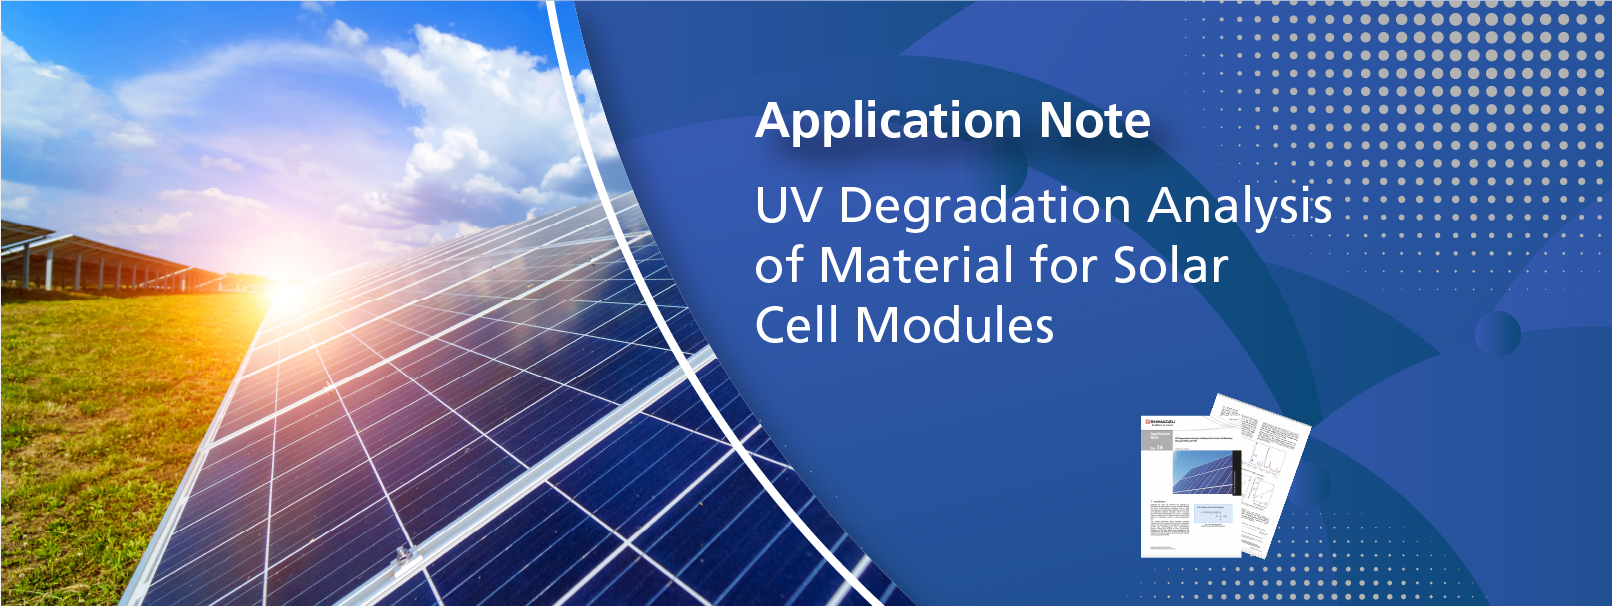 UV Degradation Analysis of Material for Solar Cell Modules